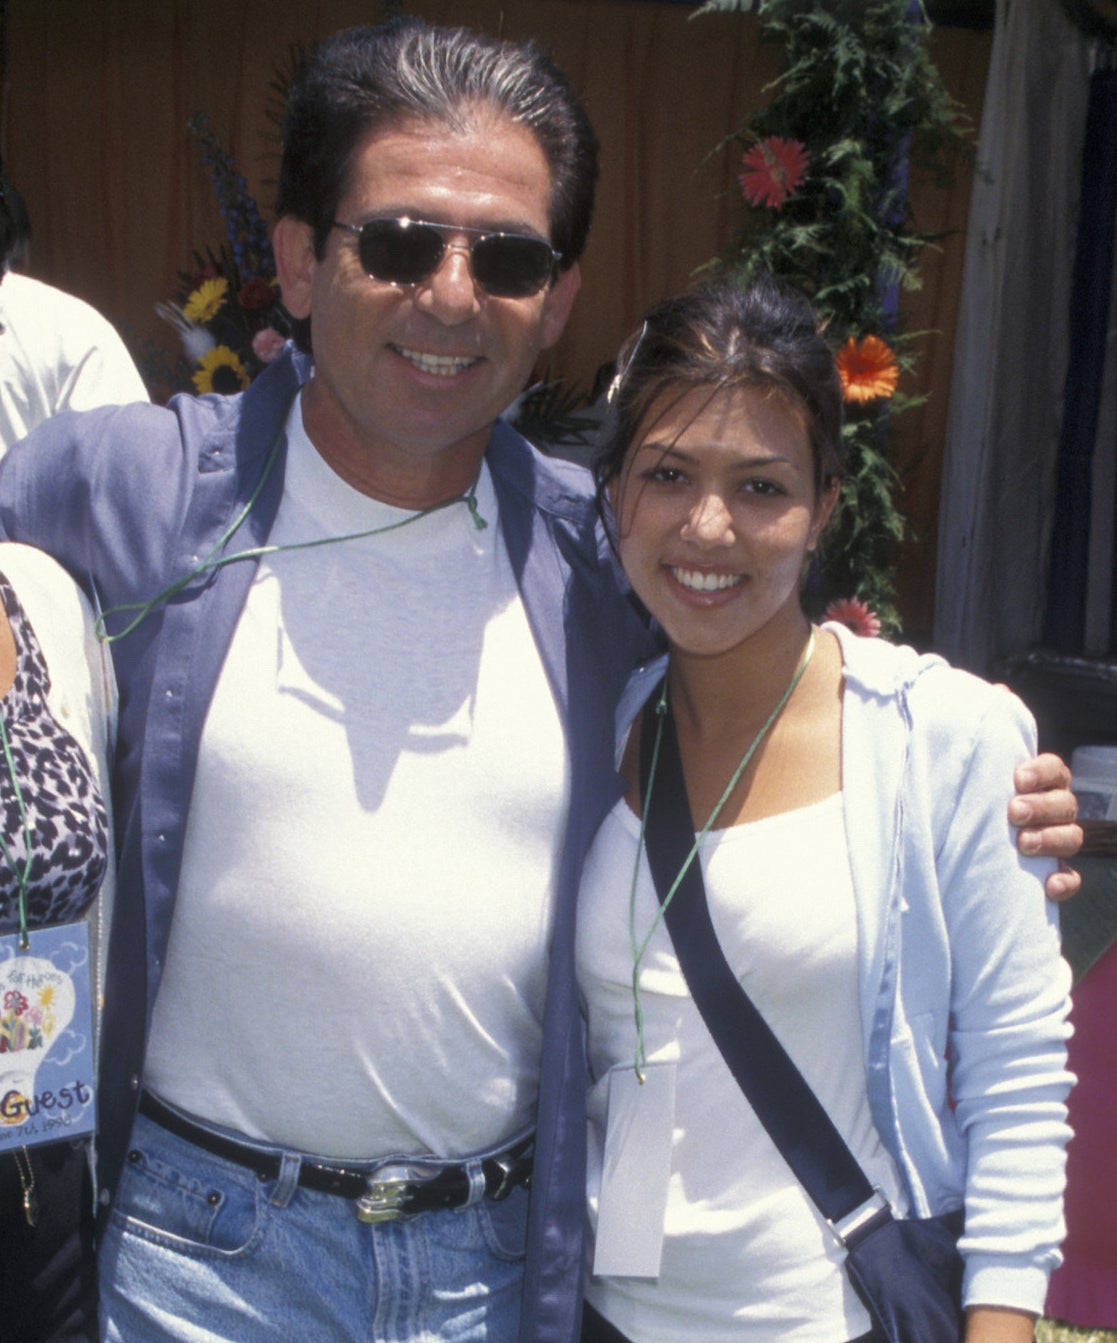 A old photo of Kourtney as a teenager and her father Robert